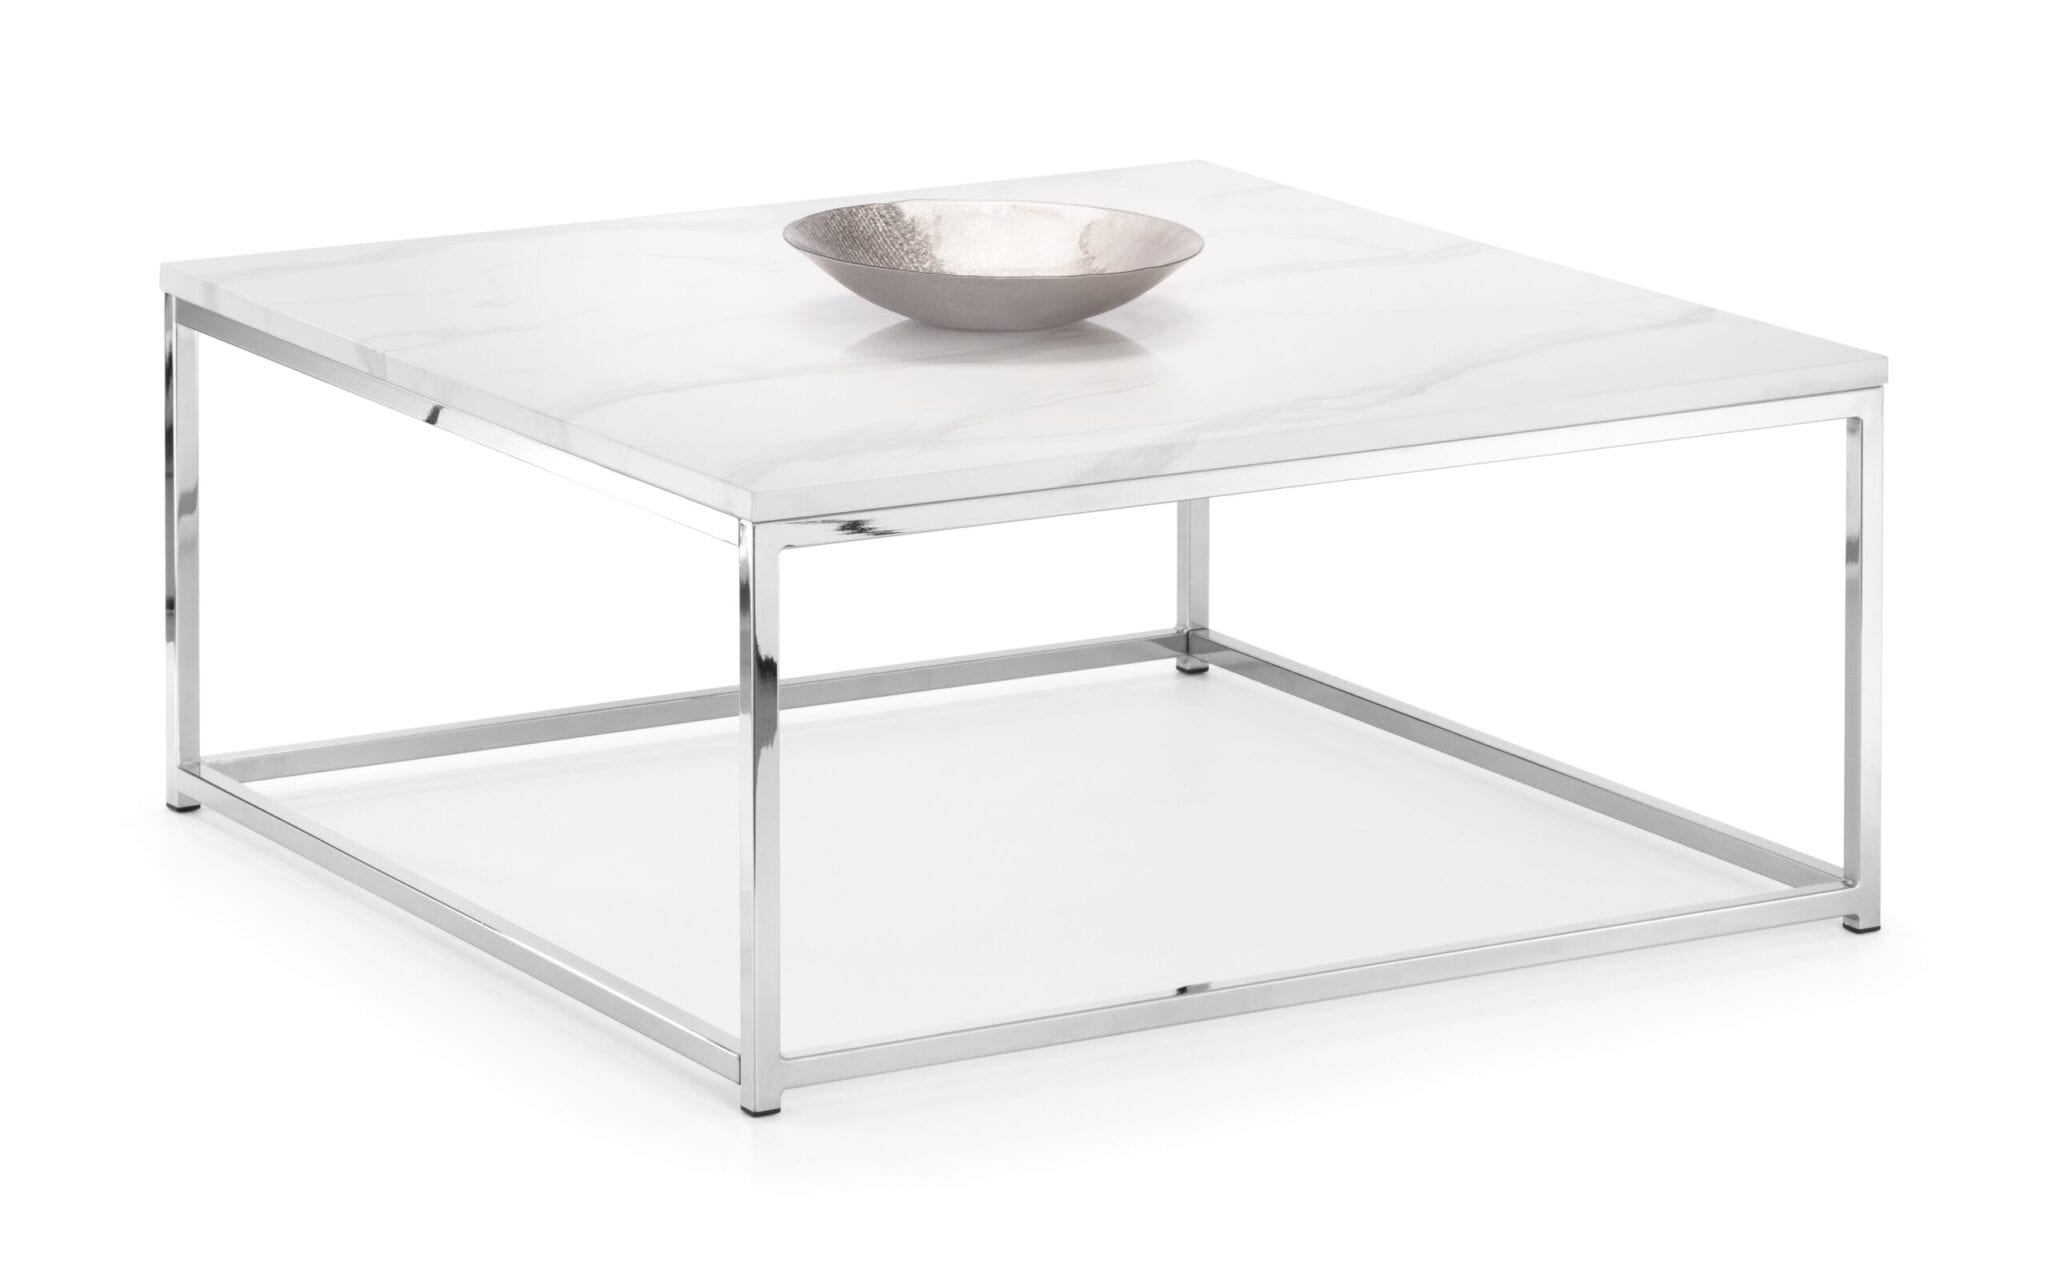 Visco Marble Top Coffee Table - White Marble